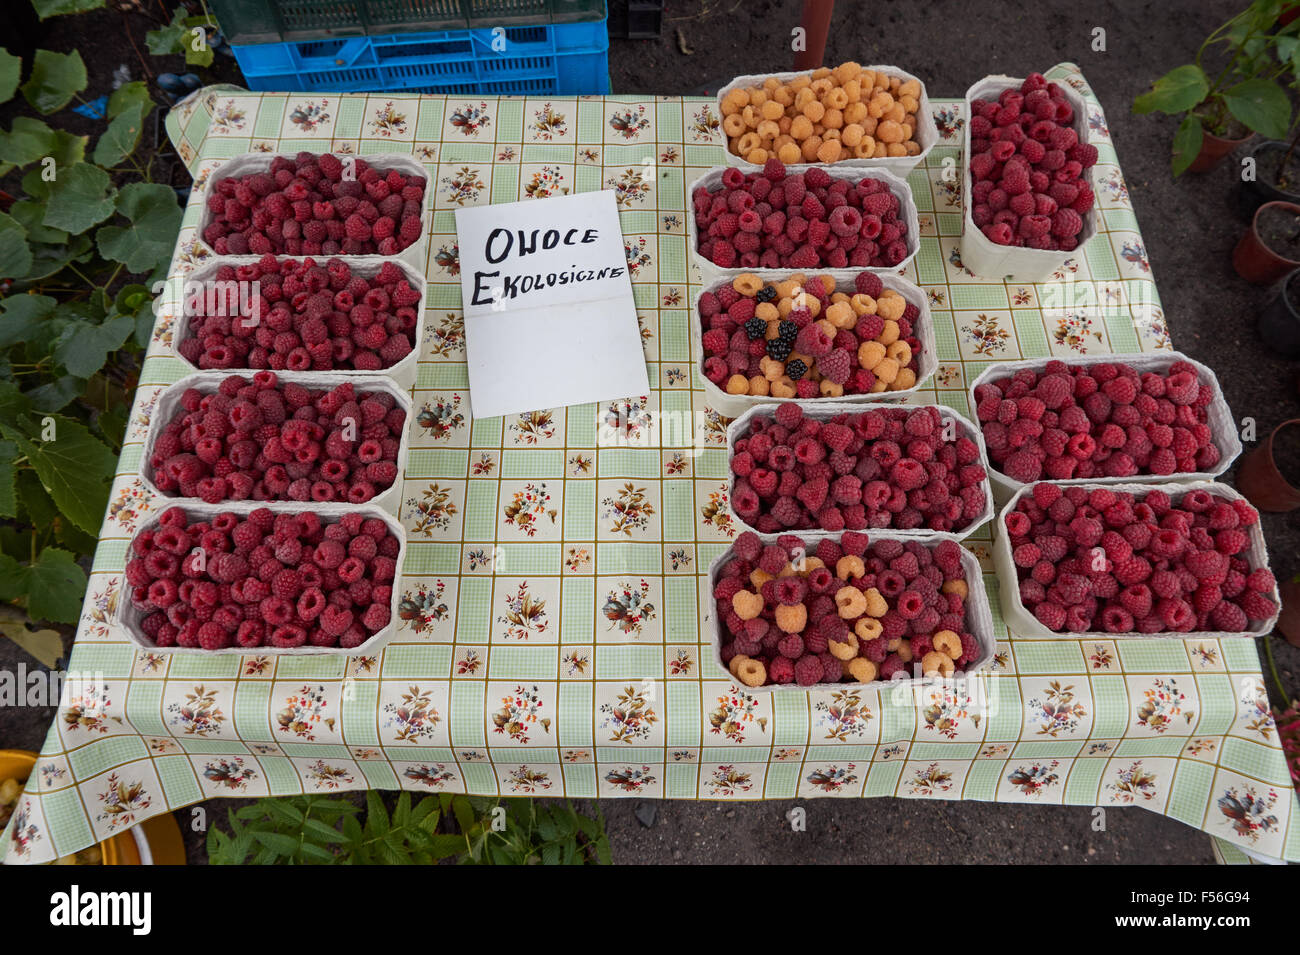 Organic red and orange raspberries at the market in Poland Stock Photo